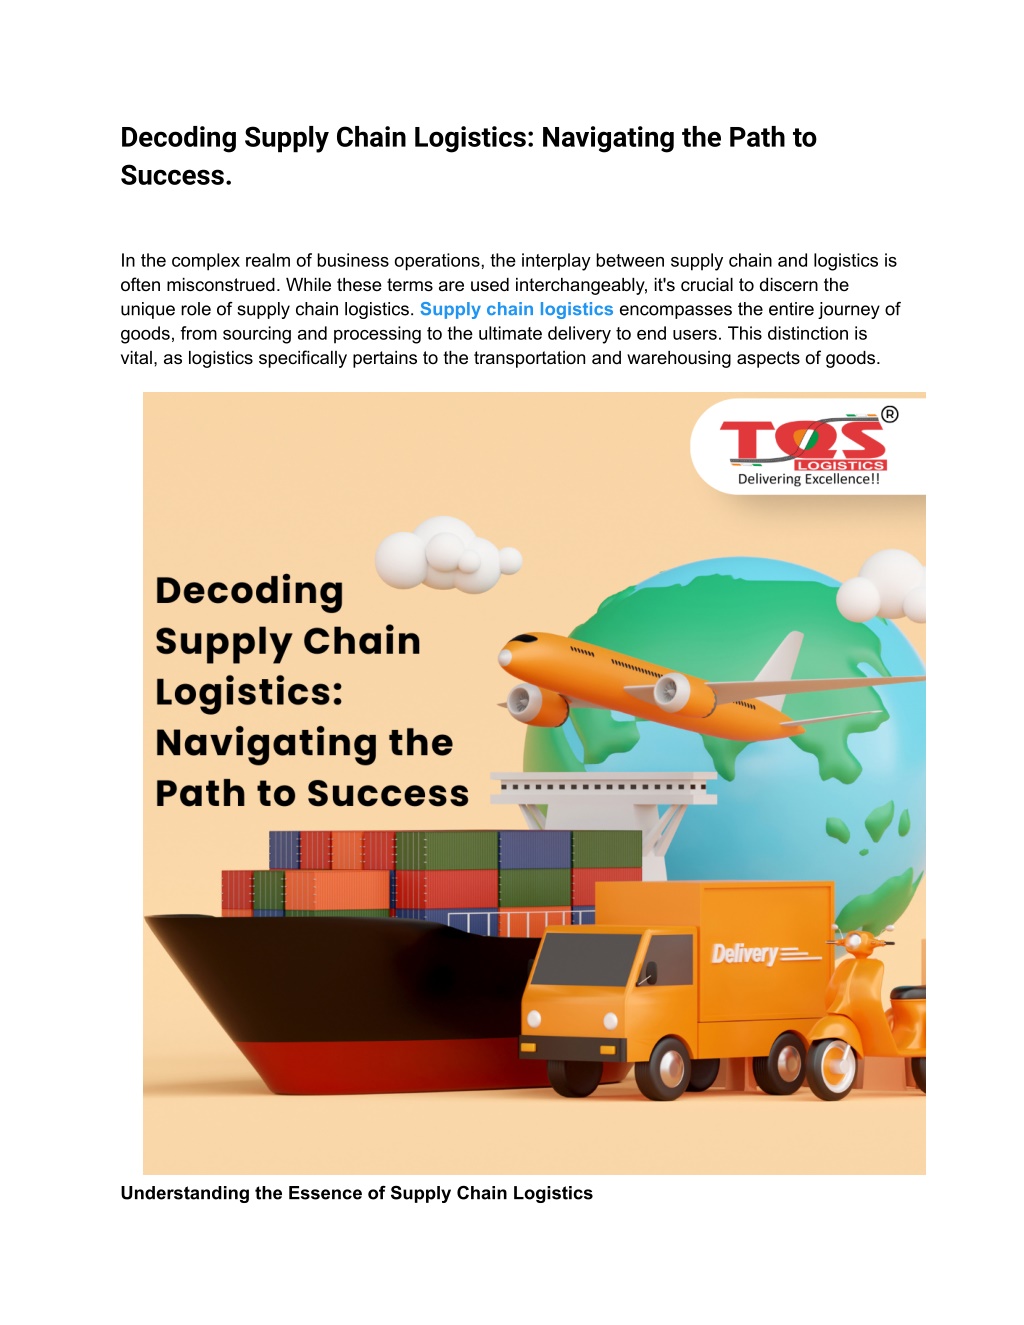 Ppt Decoding Supply Chain Logistics Navigating The Path To Success Powerpoint Presentation 9957